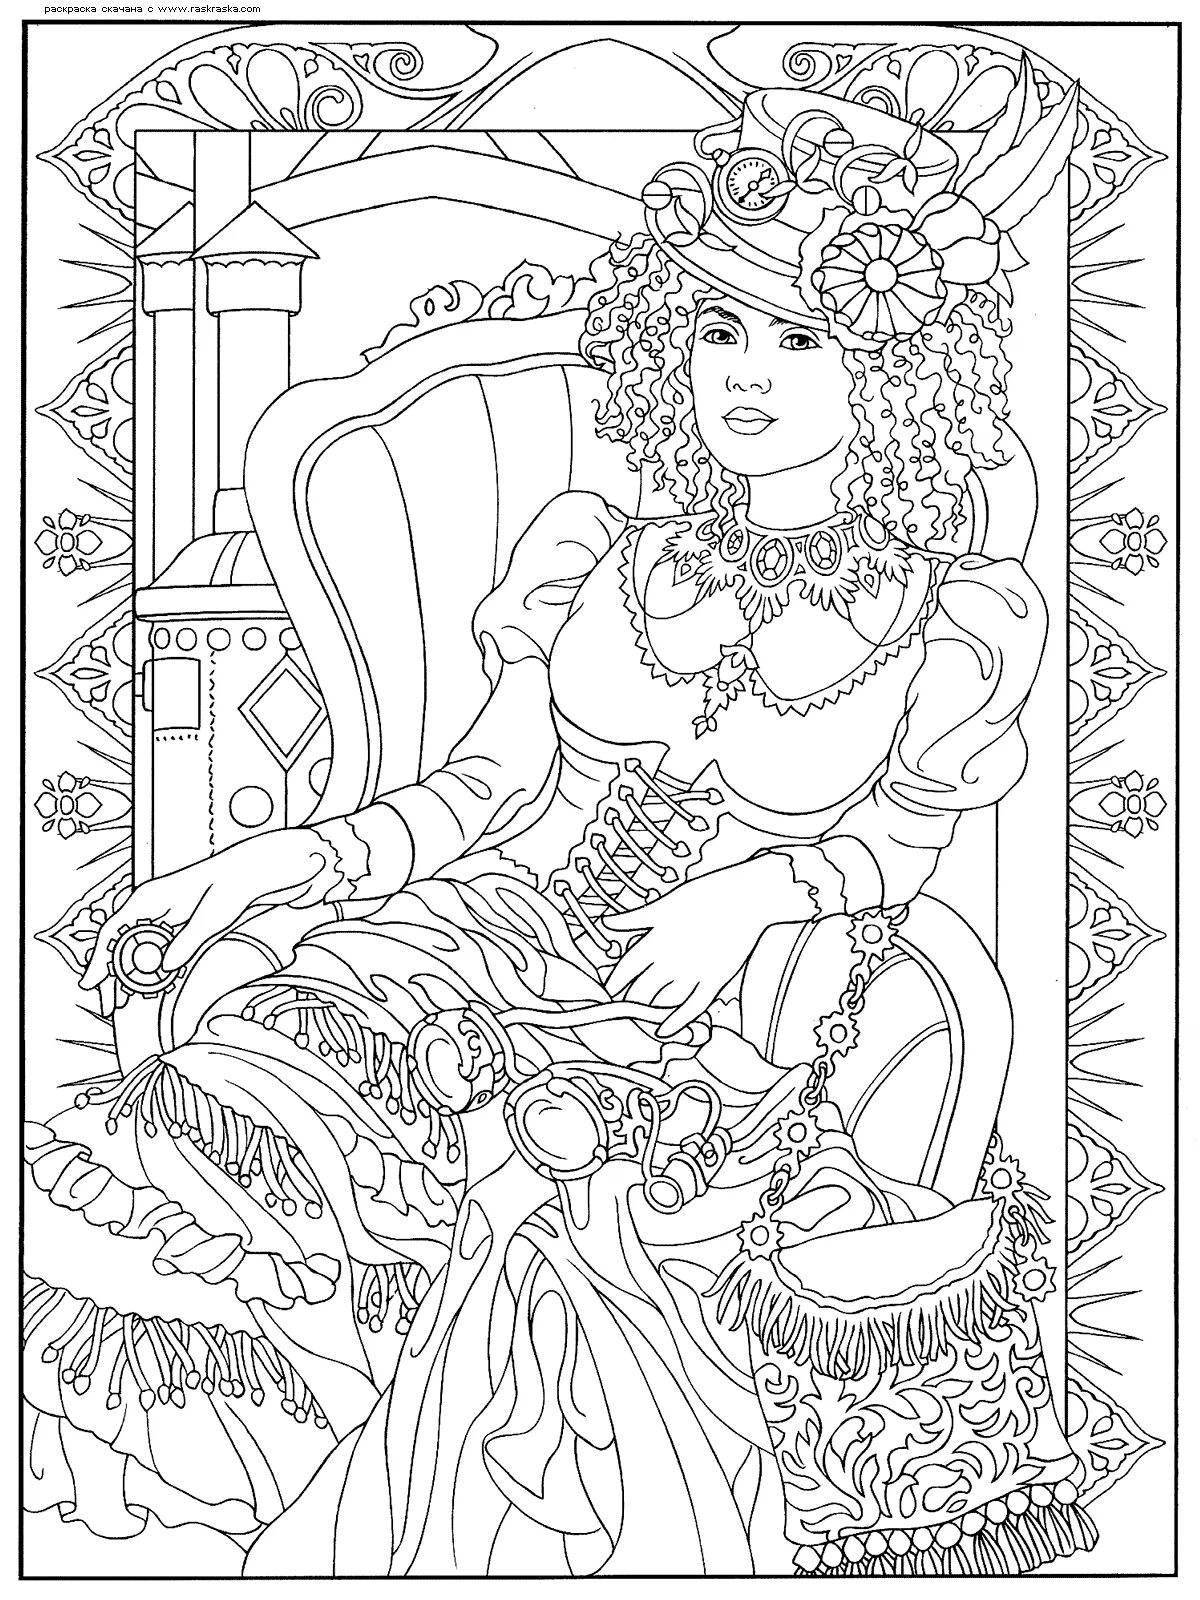 A fun coloring book for all adult girls